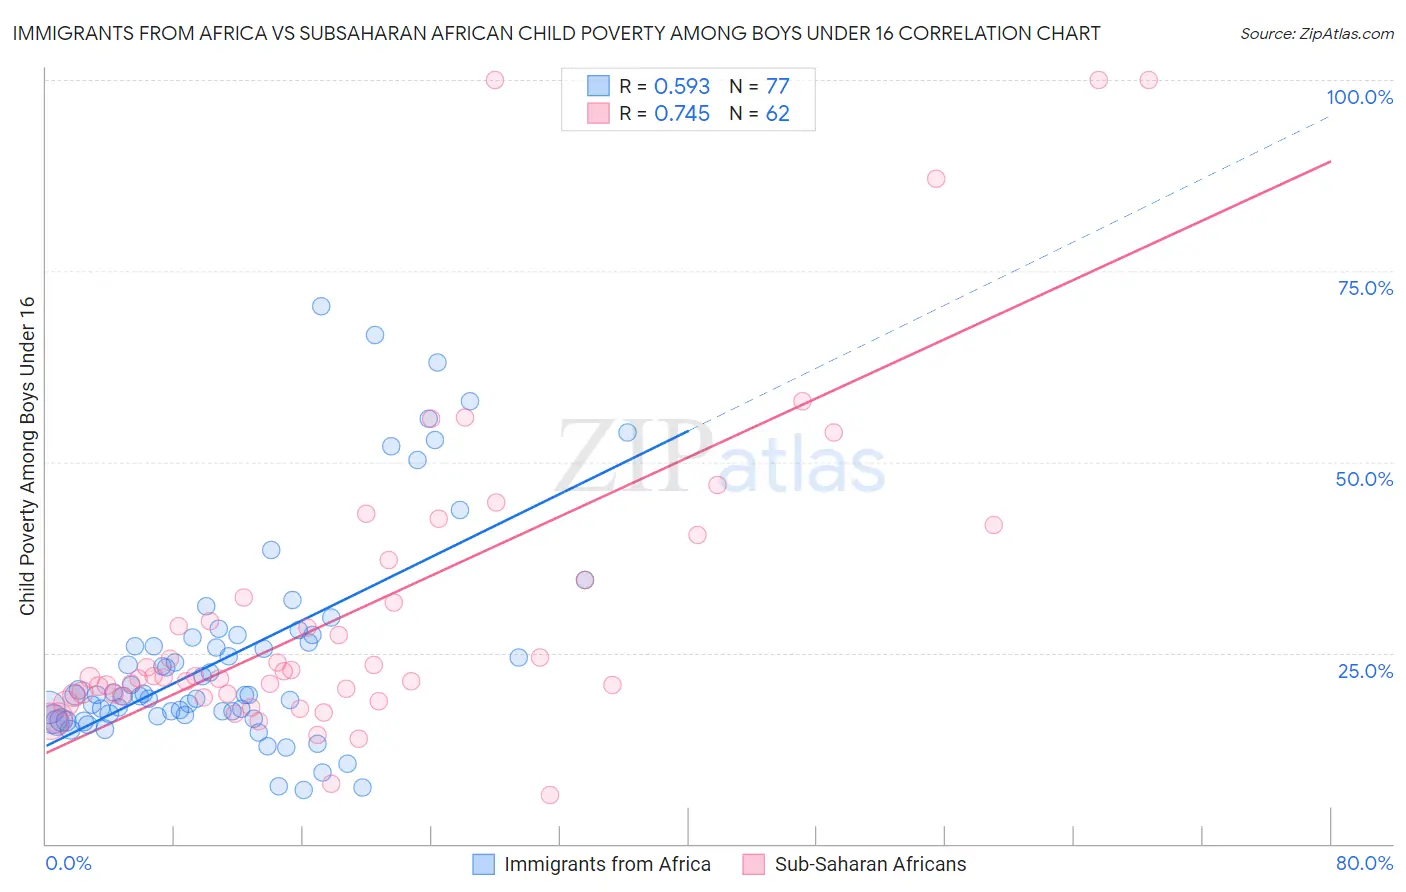 Immigrants from Africa vs Subsaharan African Child Poverty Among Boys Under 16